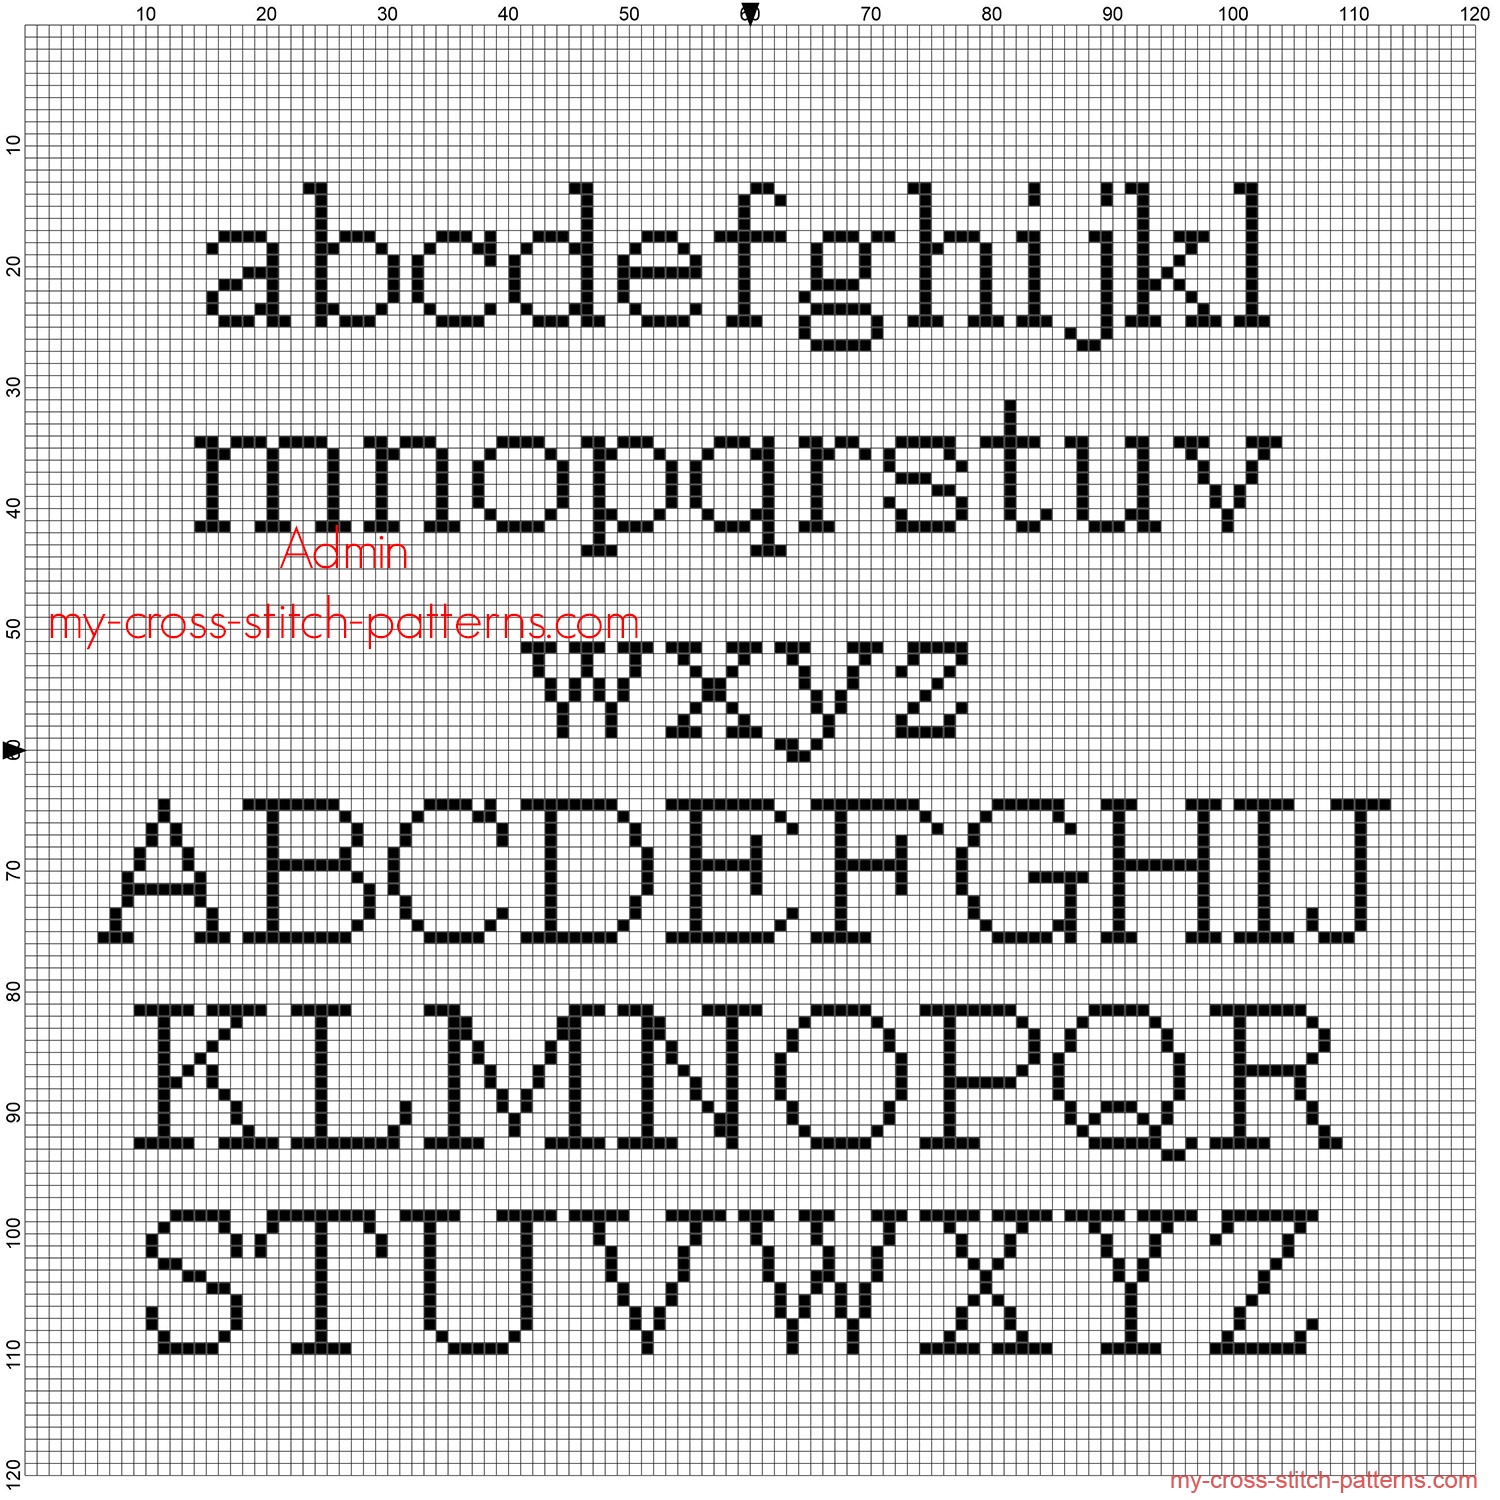 cross-stitch-alphabet-batang-all-letters-free-pattern-download-free